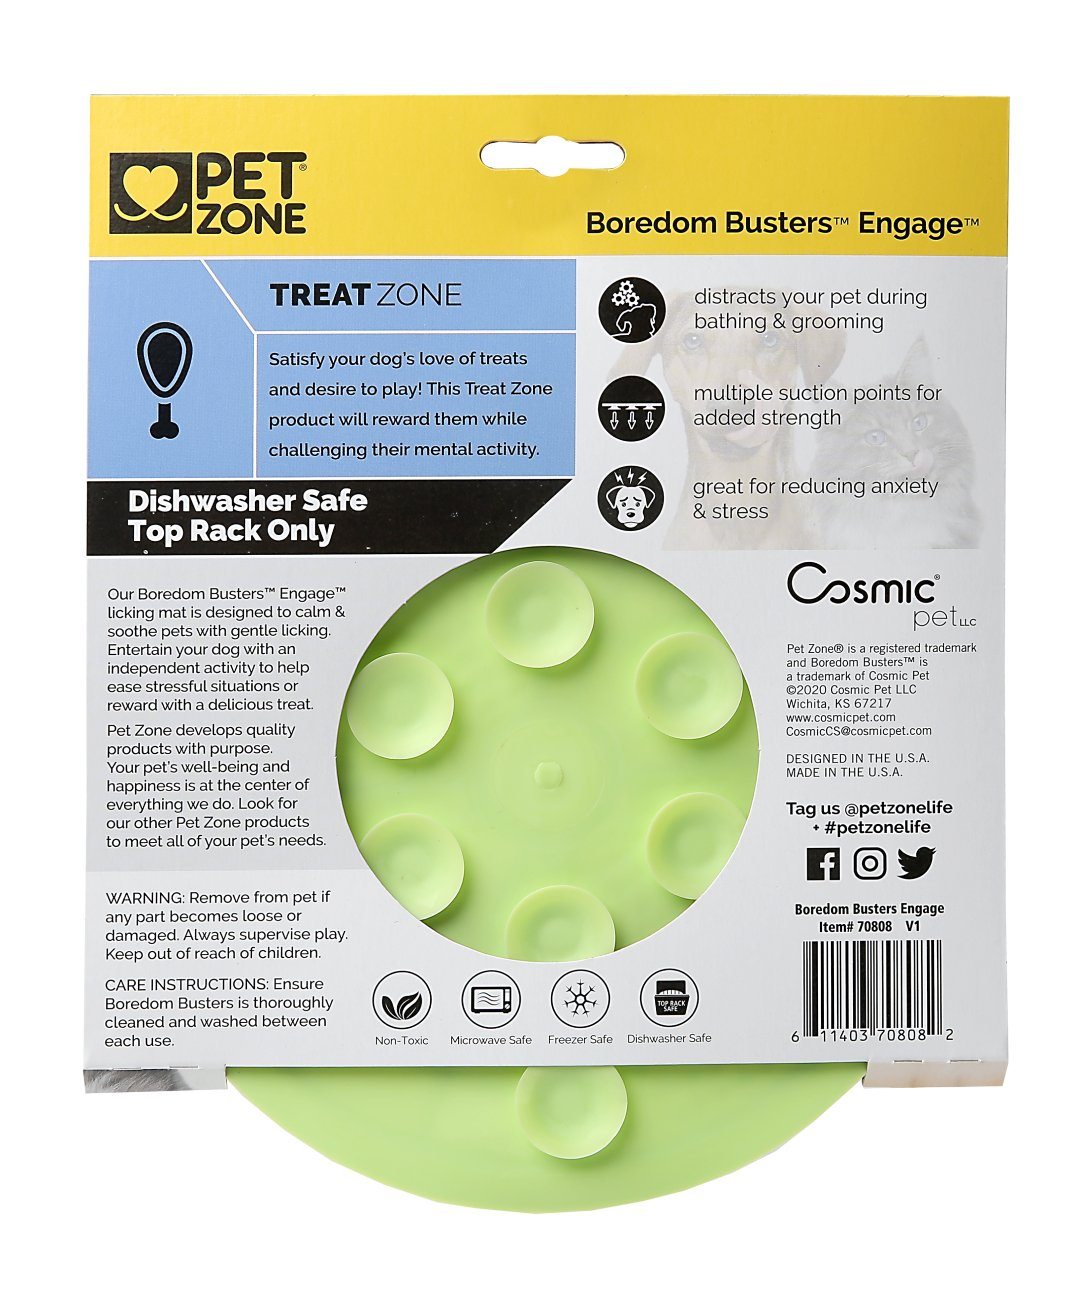 Pet Zone Boredom Busters Relax Pet Slow Feeder Licking Mat M